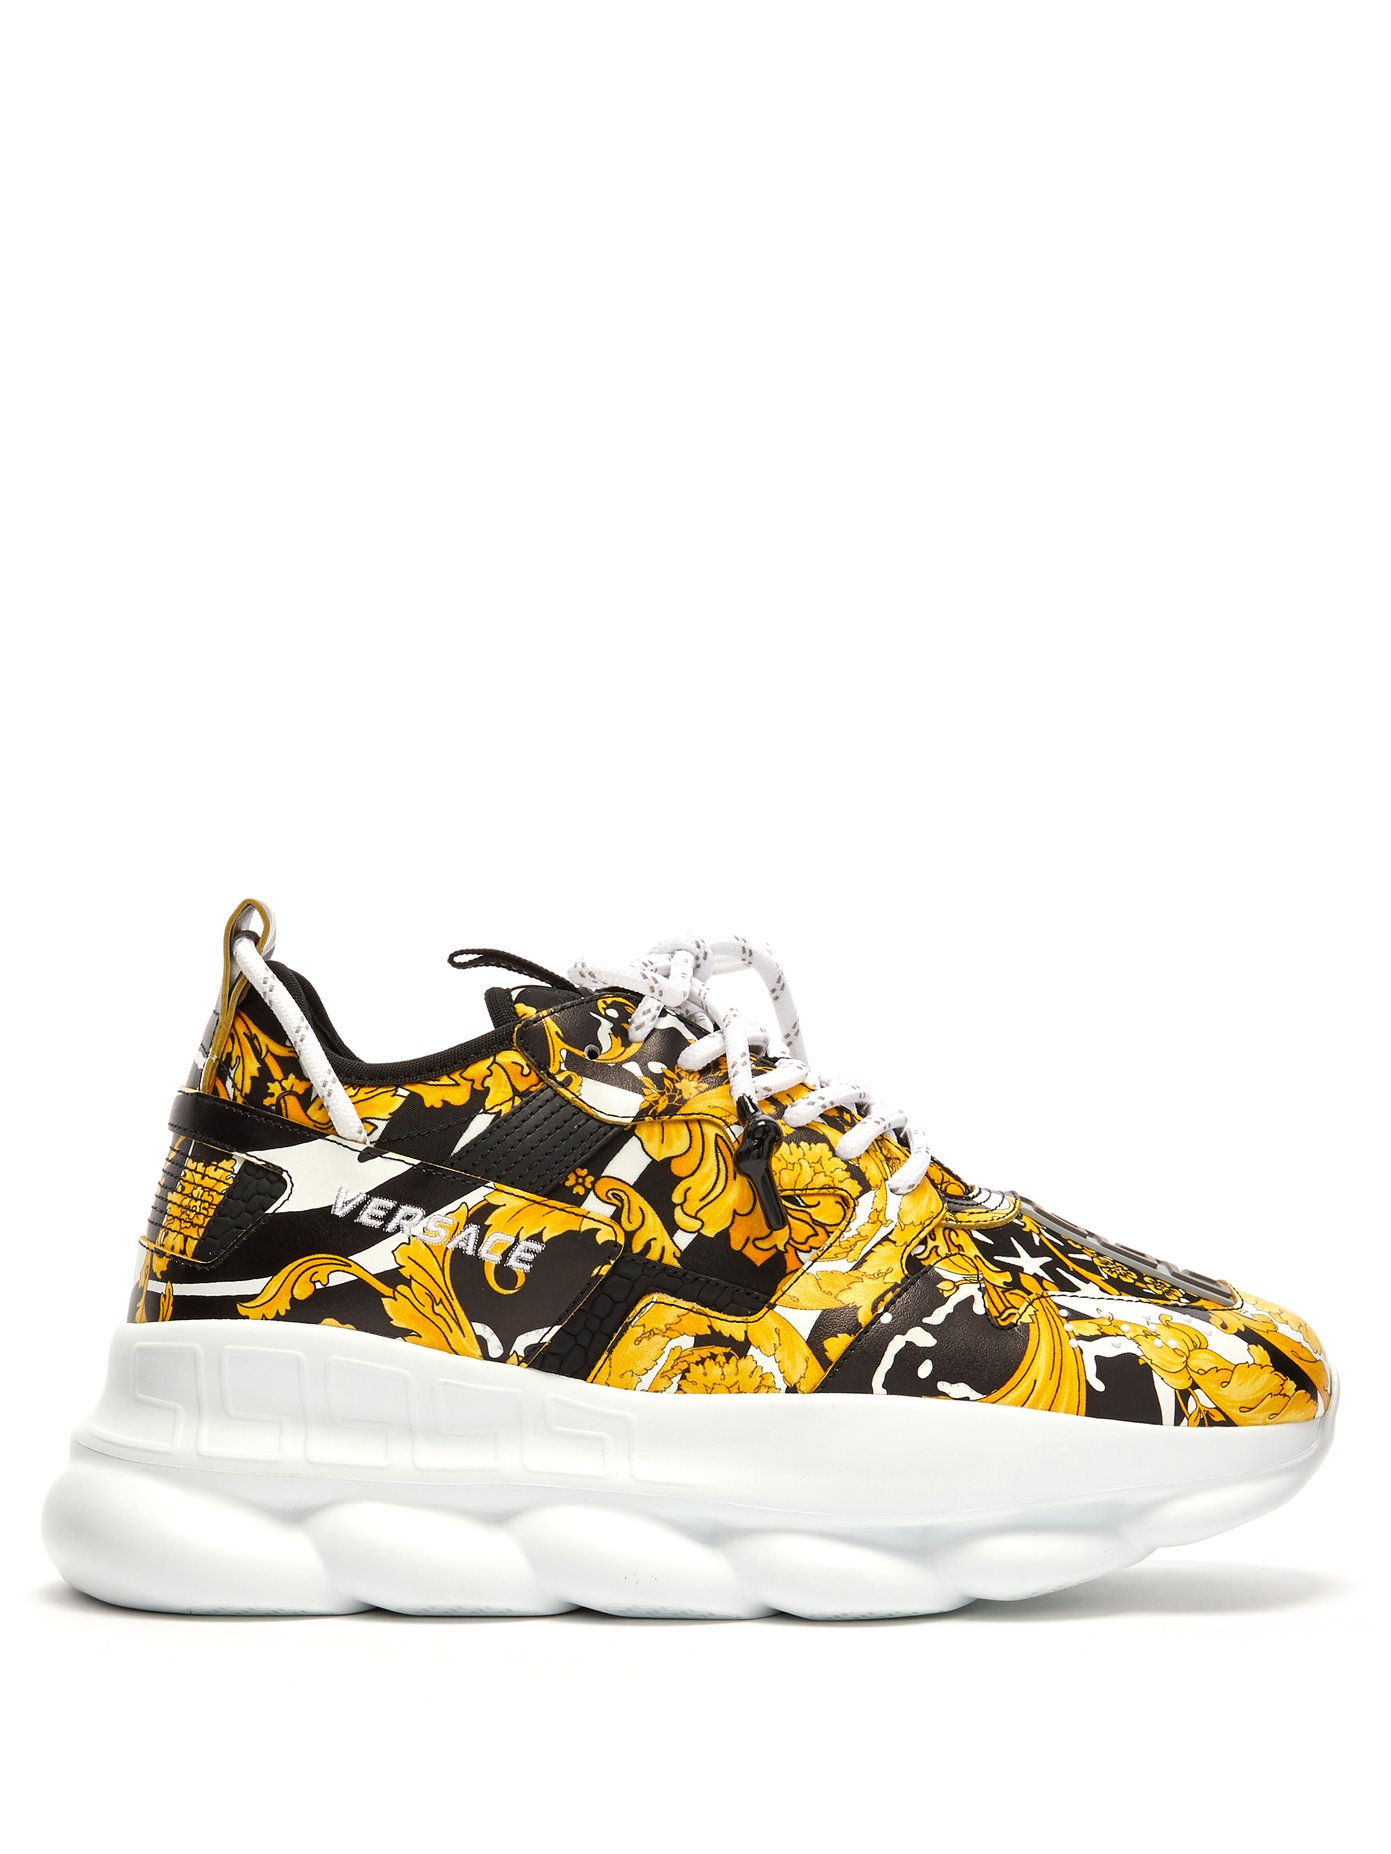 Chain Reaction baroque print sneakers 